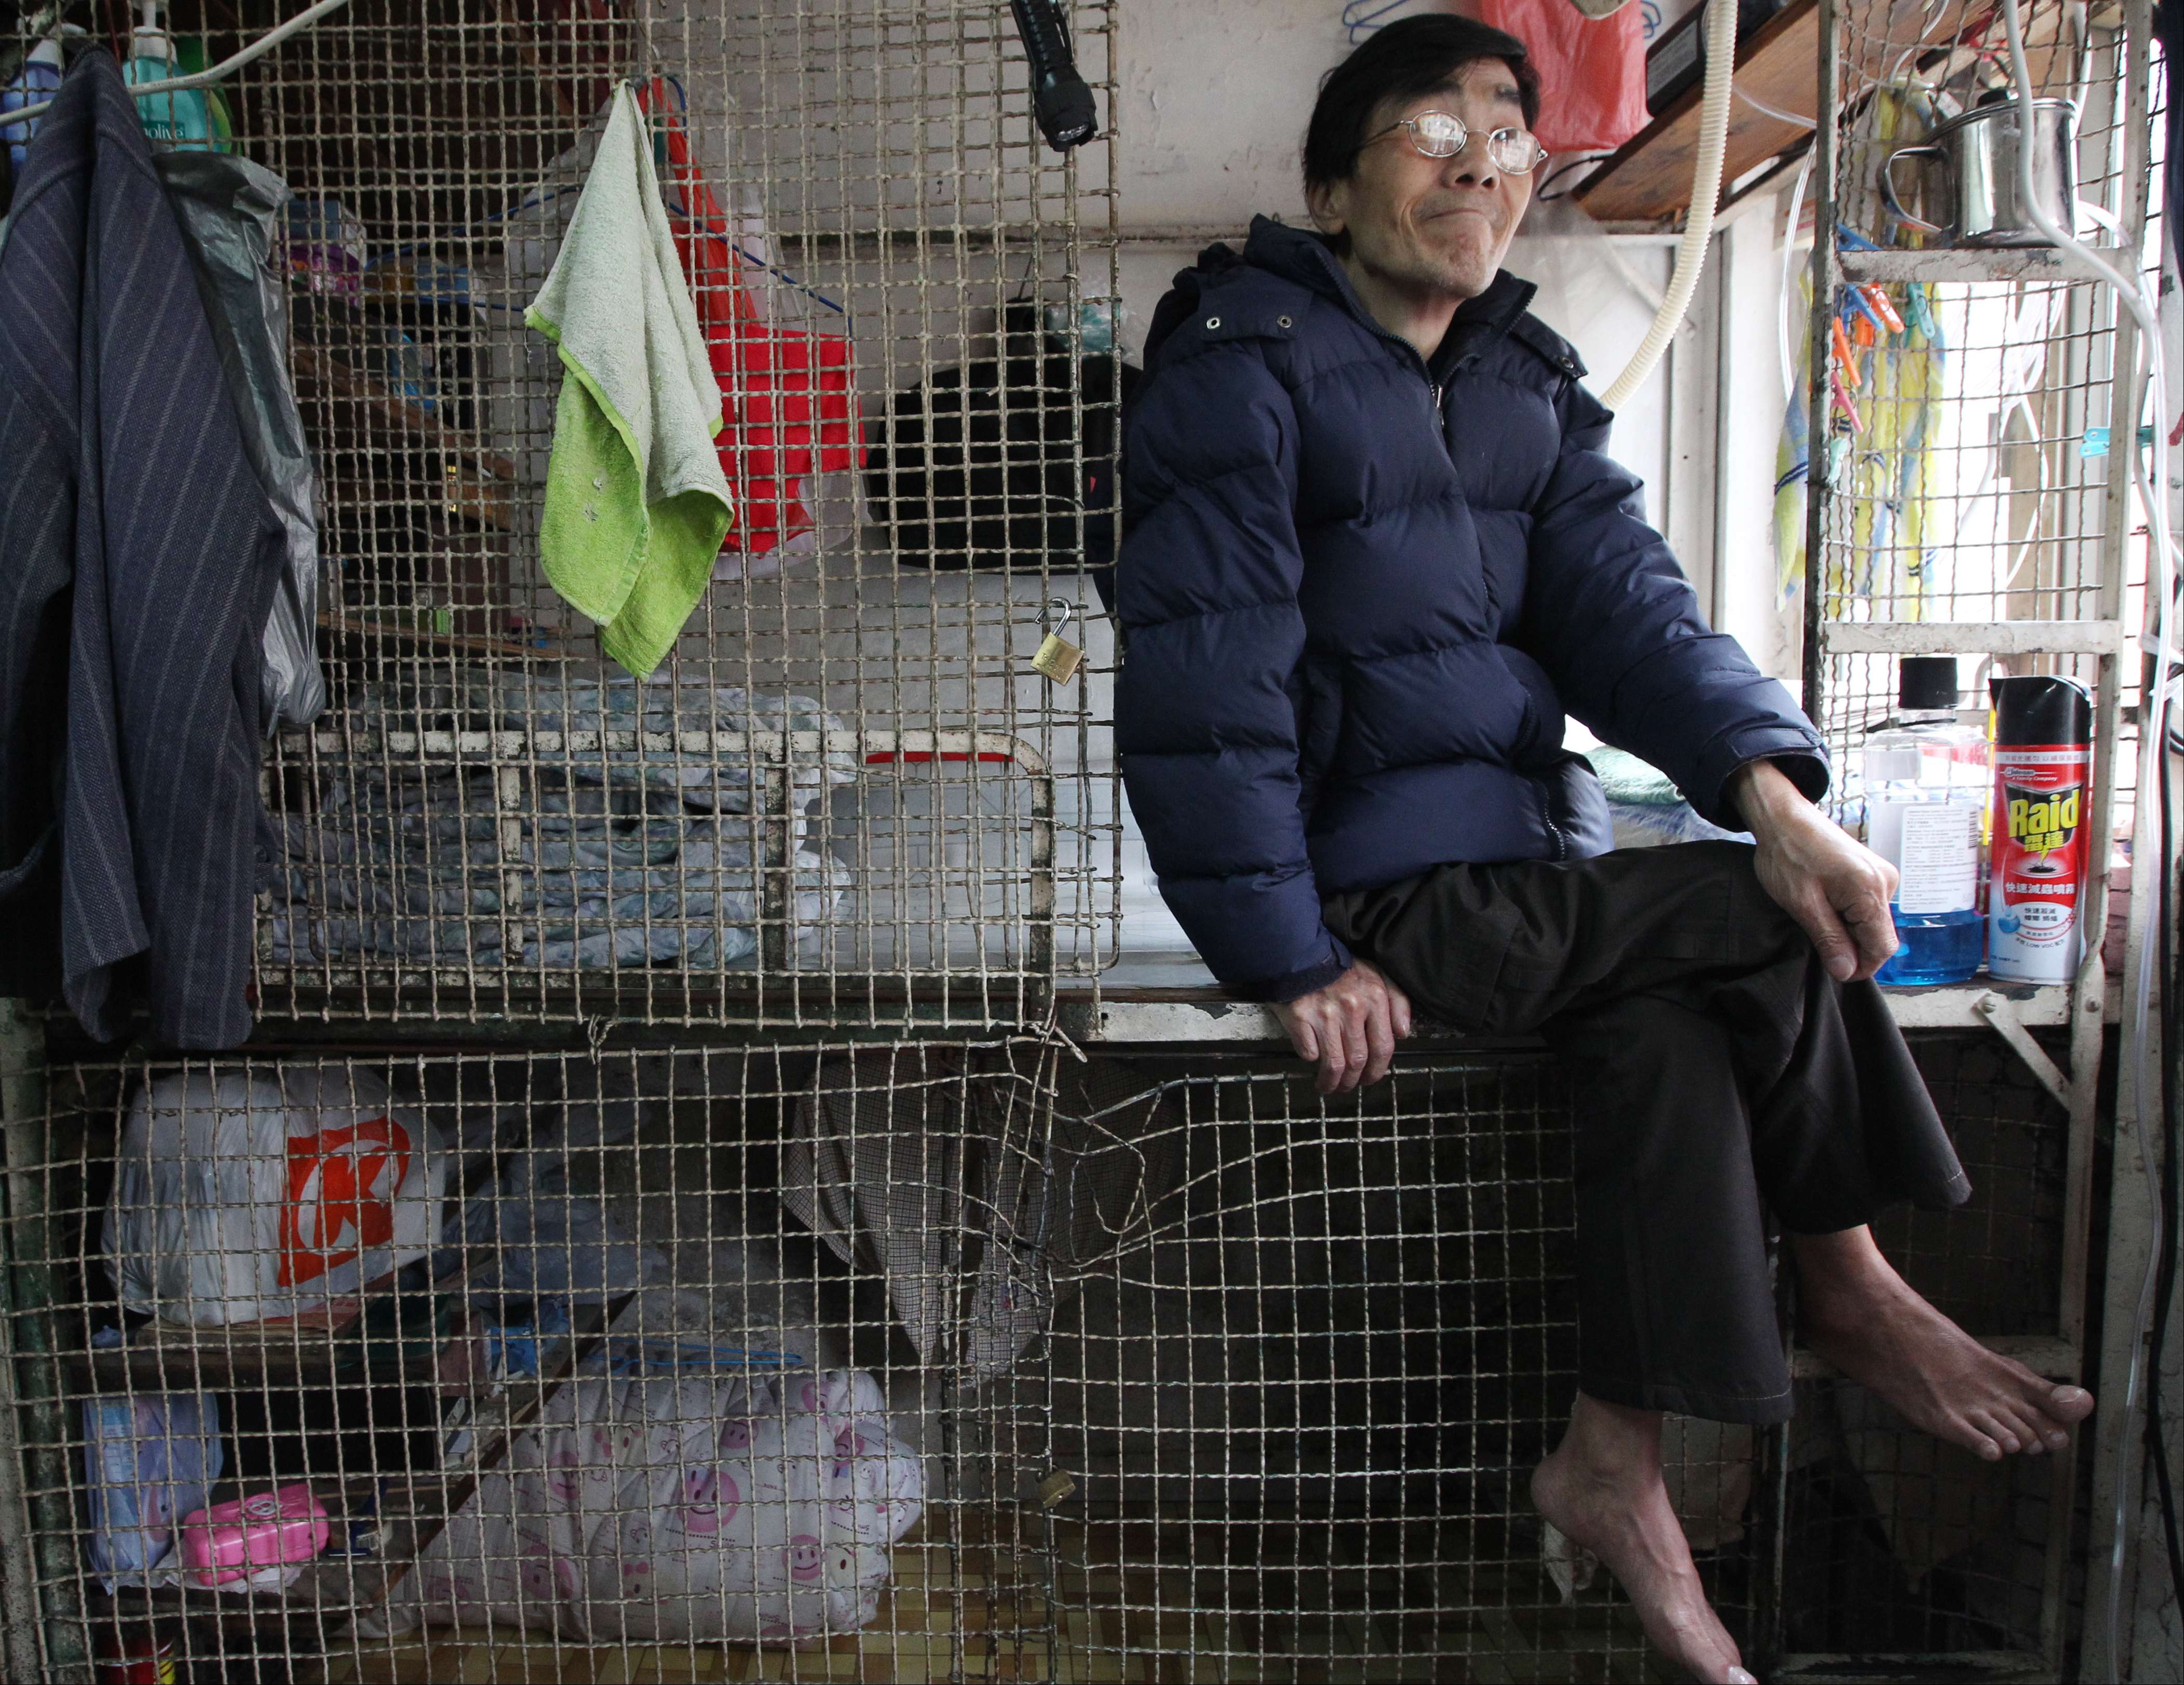 Hong Kong’s cage homes are a fact of life in what is ostensibly a wealthy society. Photo: Nora Tam